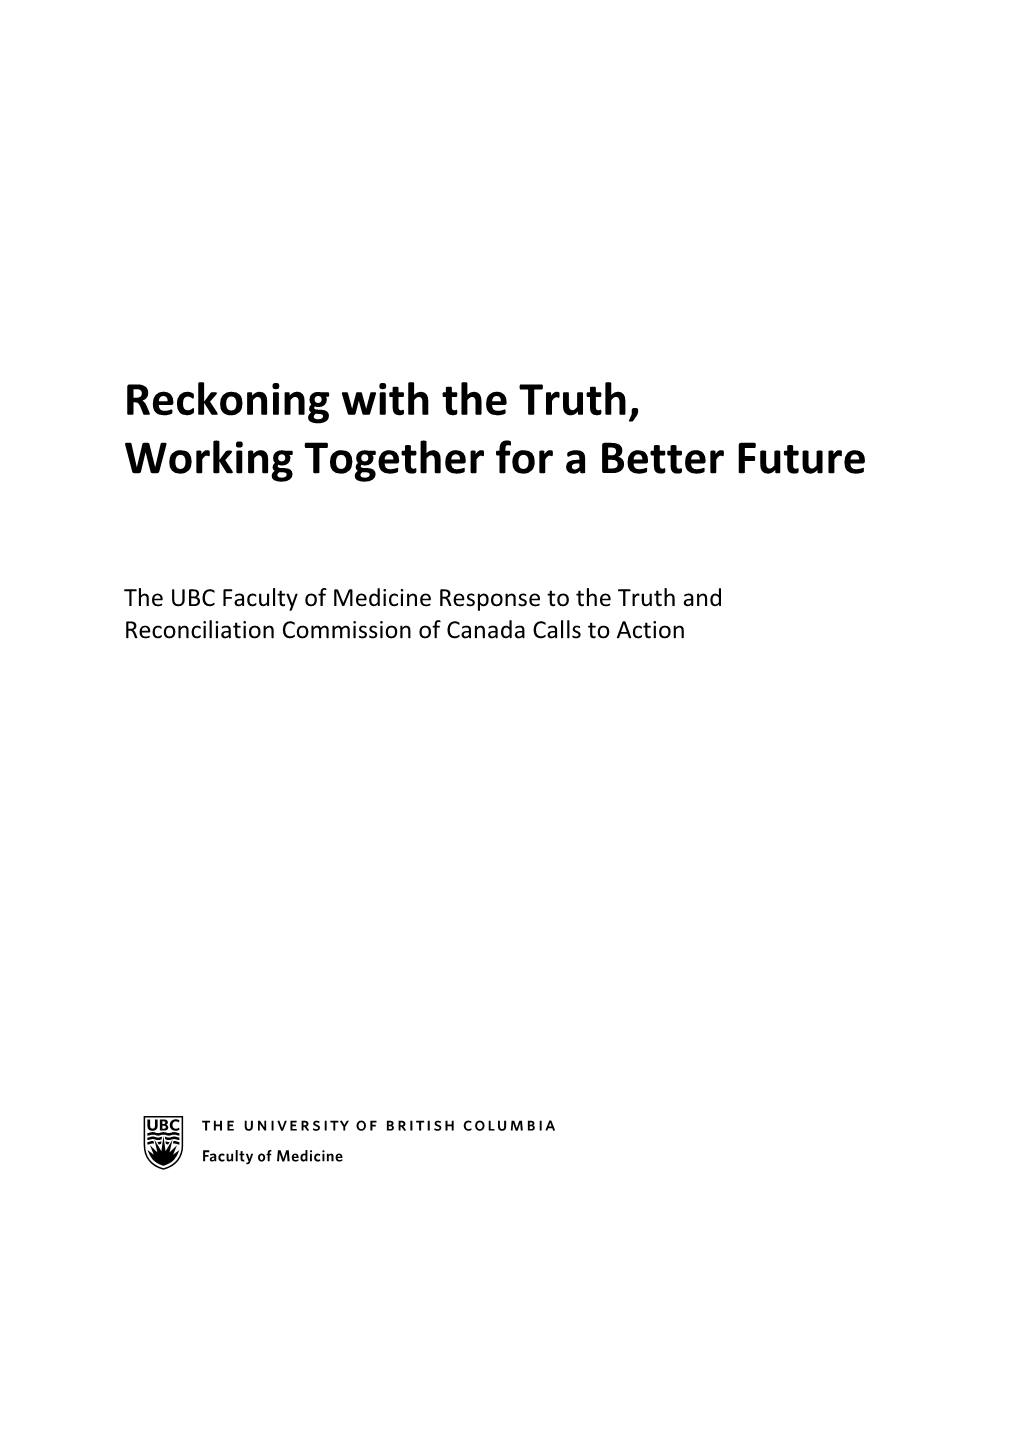 UBC Faculty of Medicine Response to the Truth and Reconciliation Commission of Canada Calls to Action